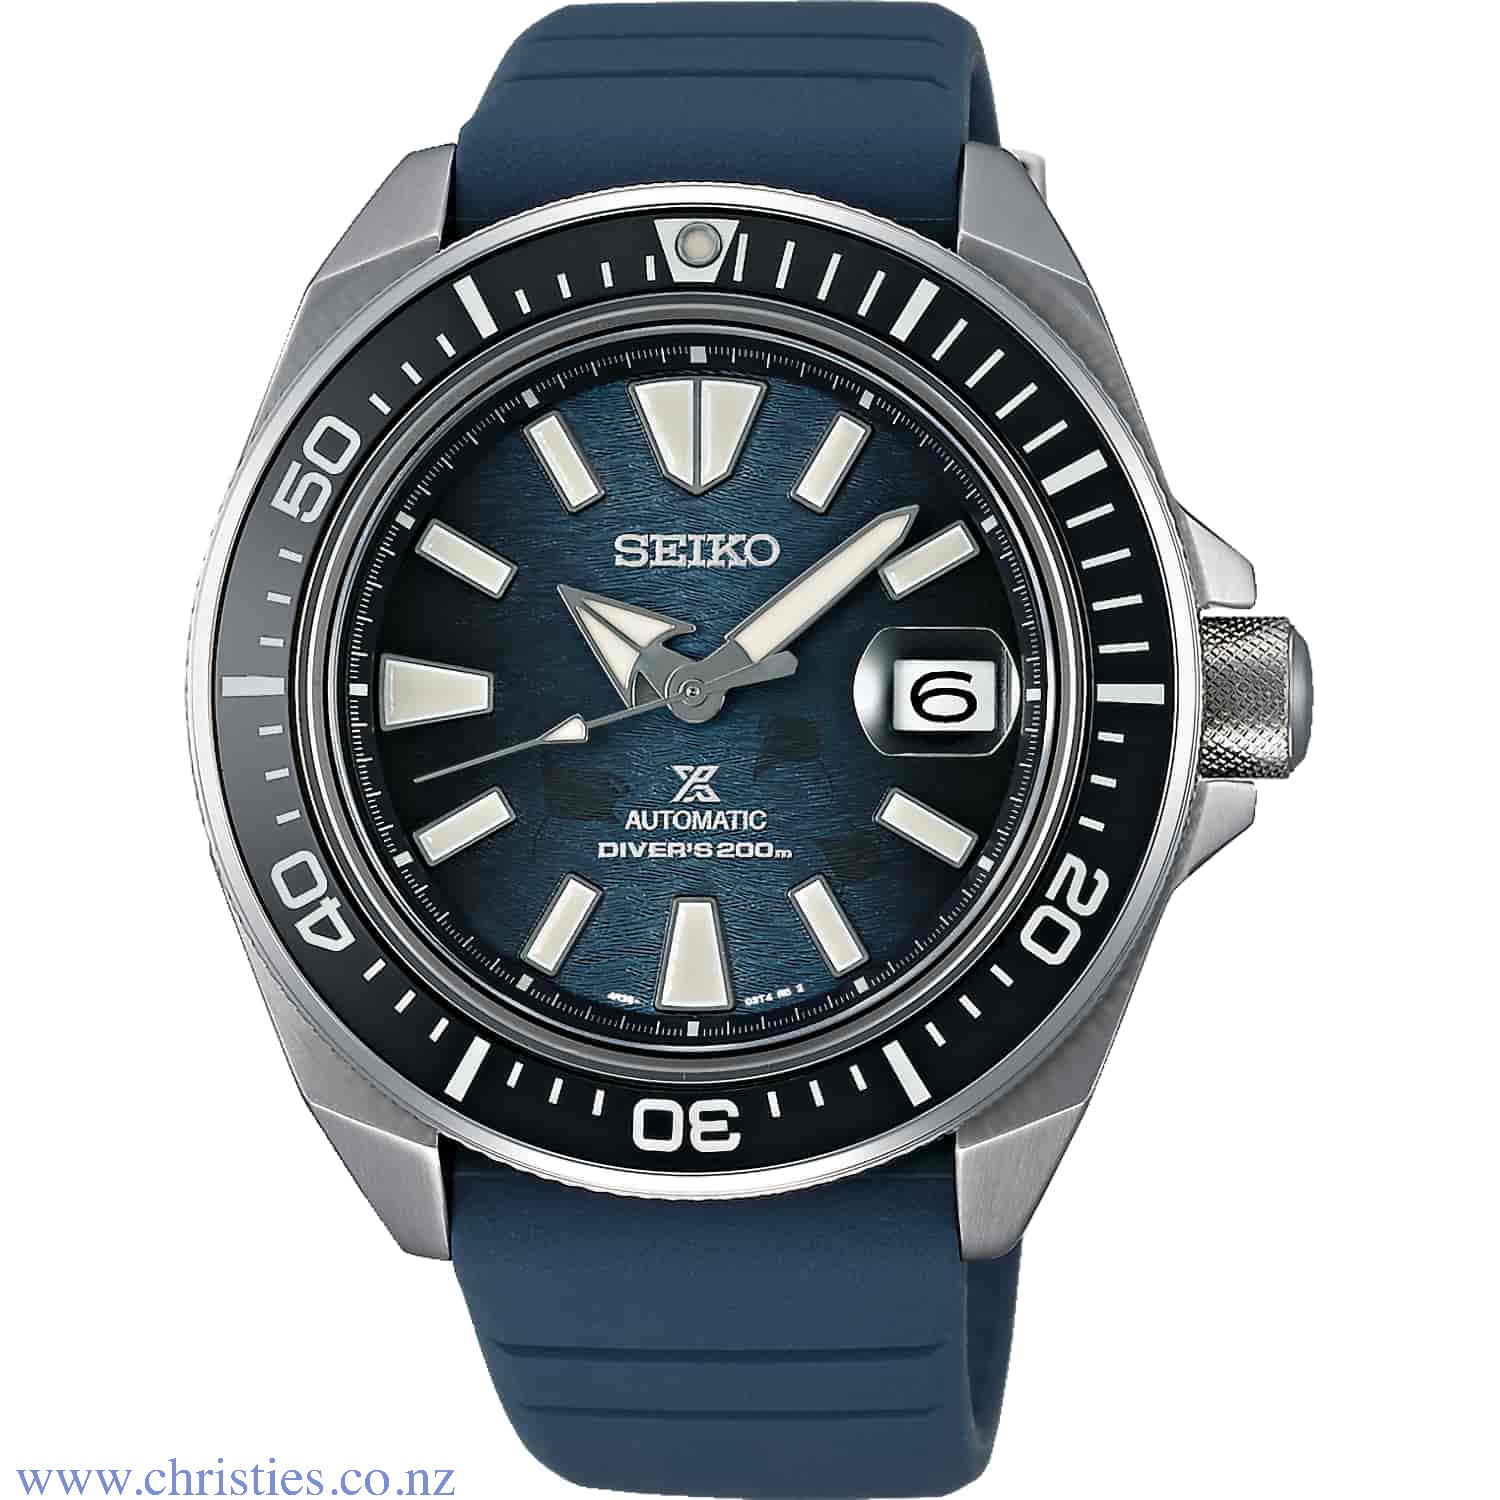 SRPF79K Seiko Prospex Automatic Divers Watch. Seiko have bolstered their legendary dive range with this new automatic divers watch LAYBUY - Pay it easy, in 6 weekly payments and have it now. Only pay the price of your purchase, when you pay your instalmen